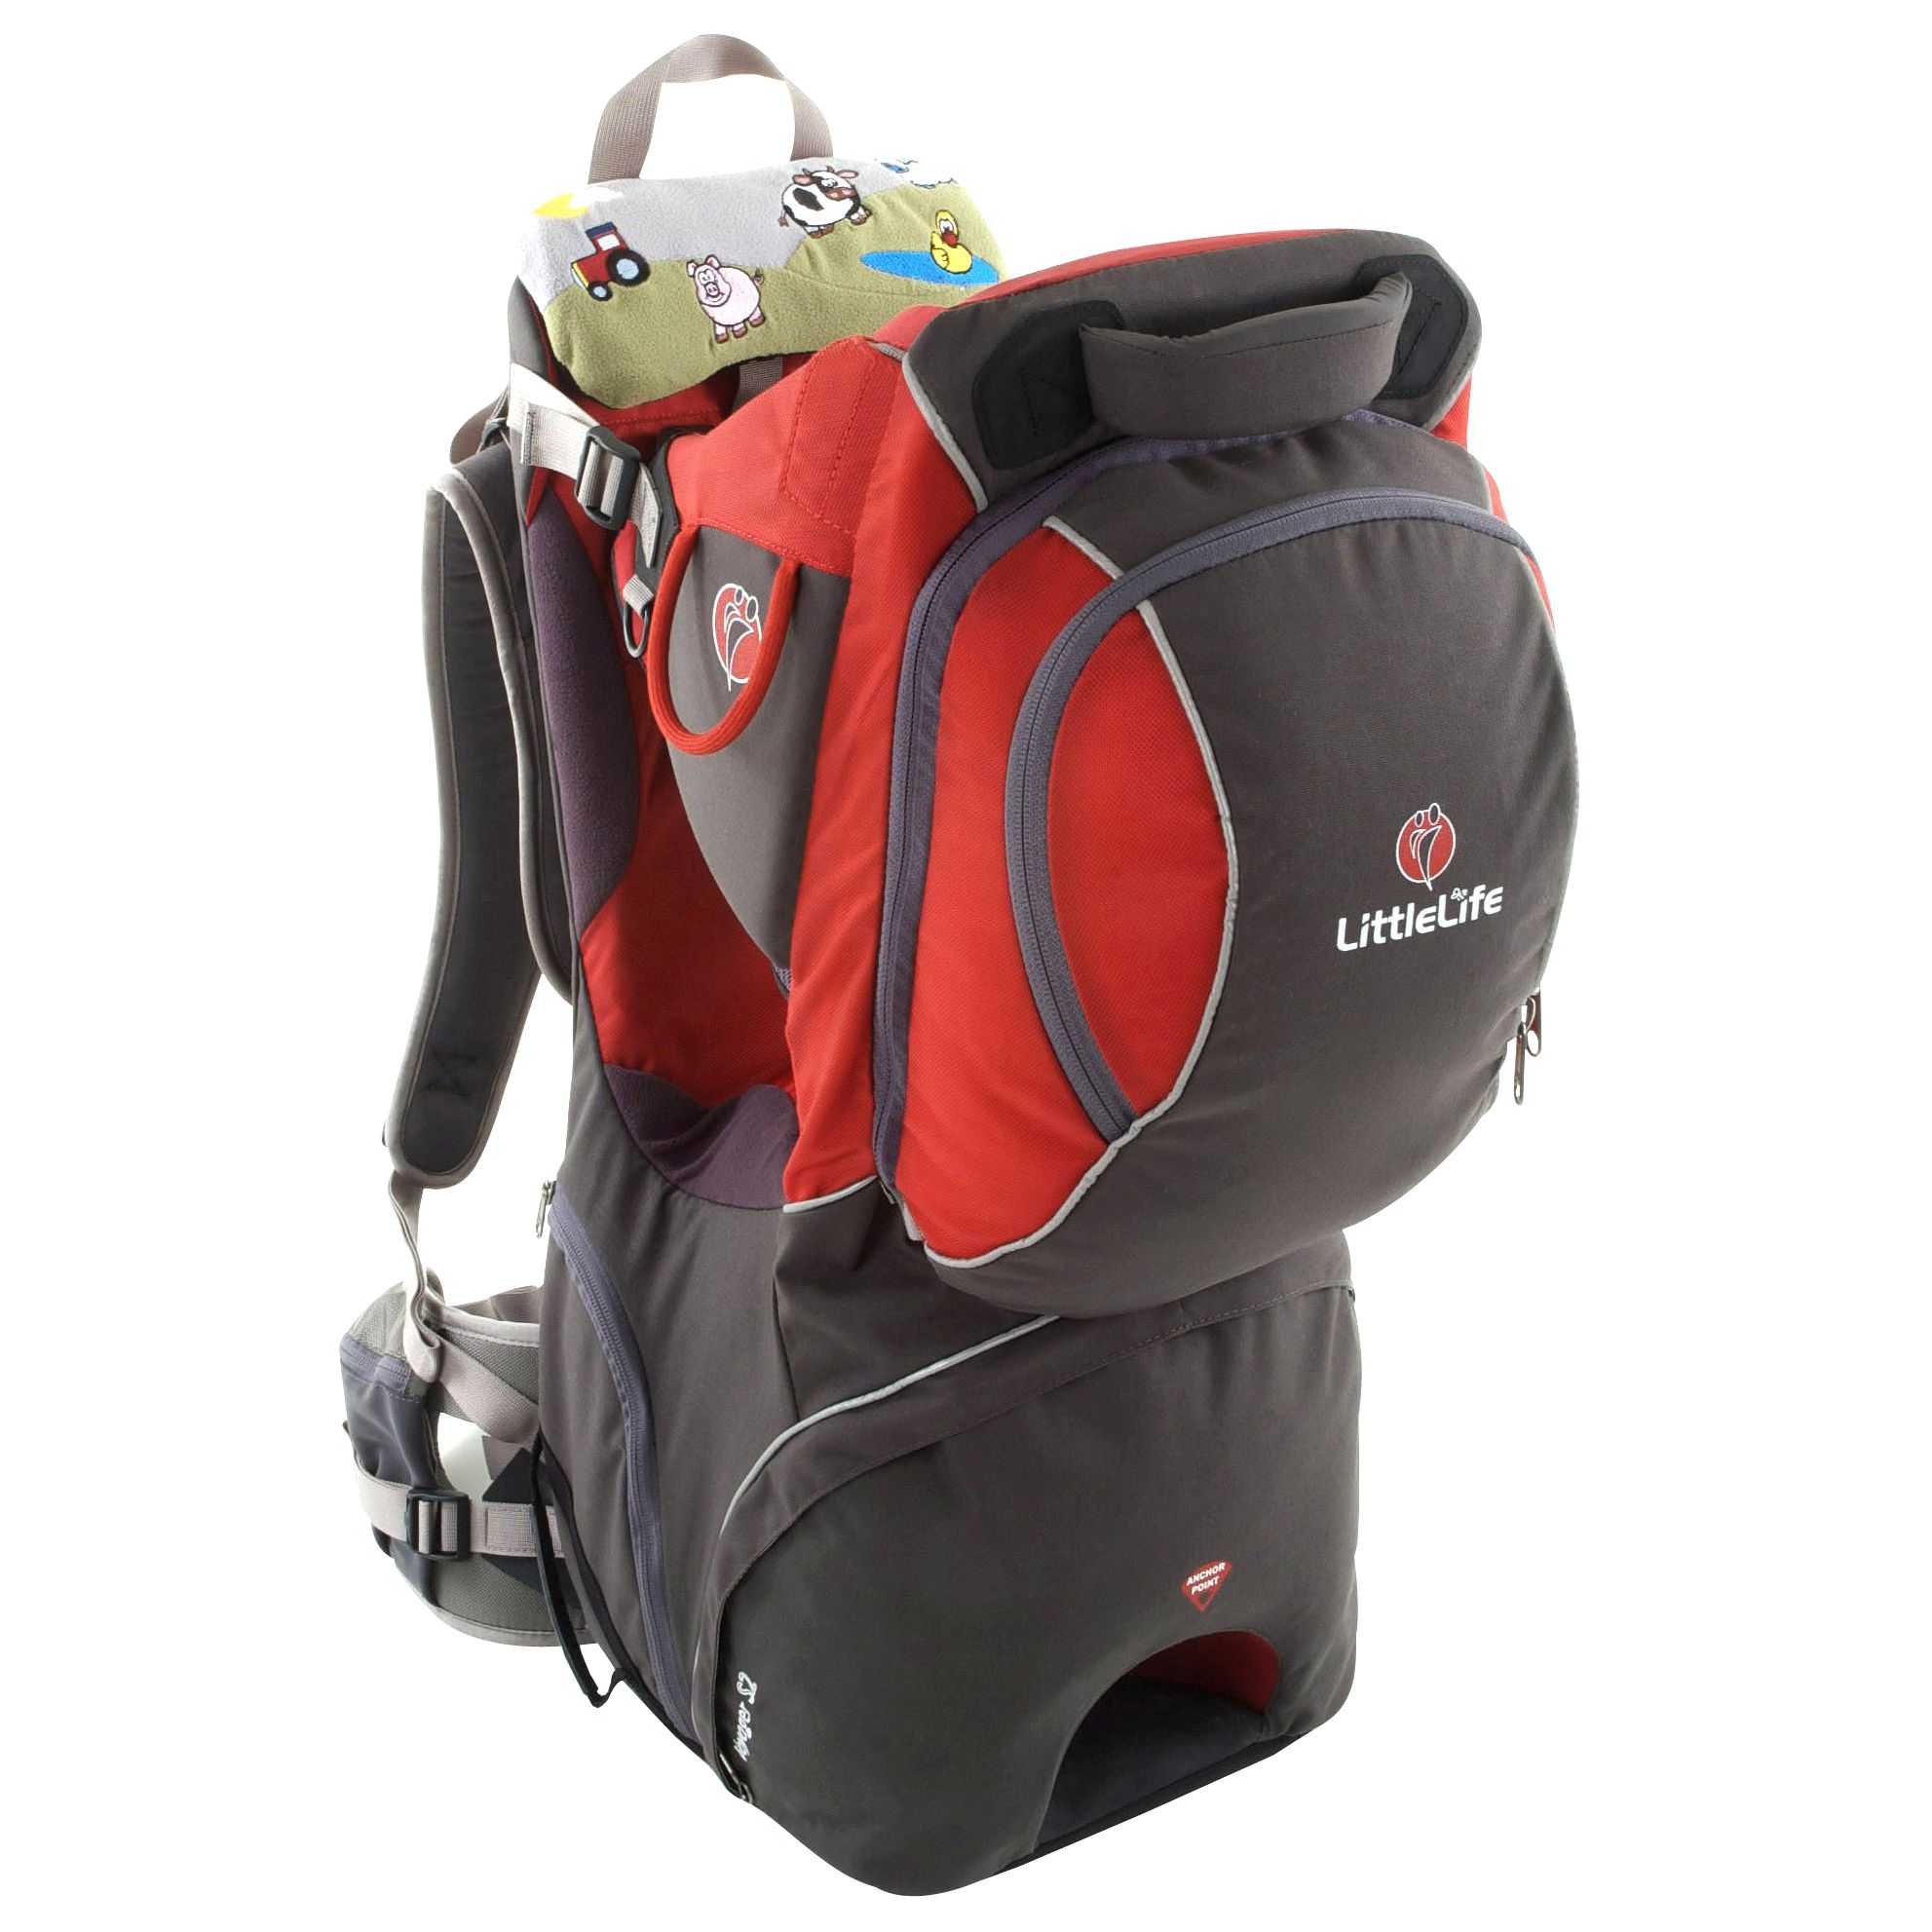 Voyager S2 Baby Back Carrier,